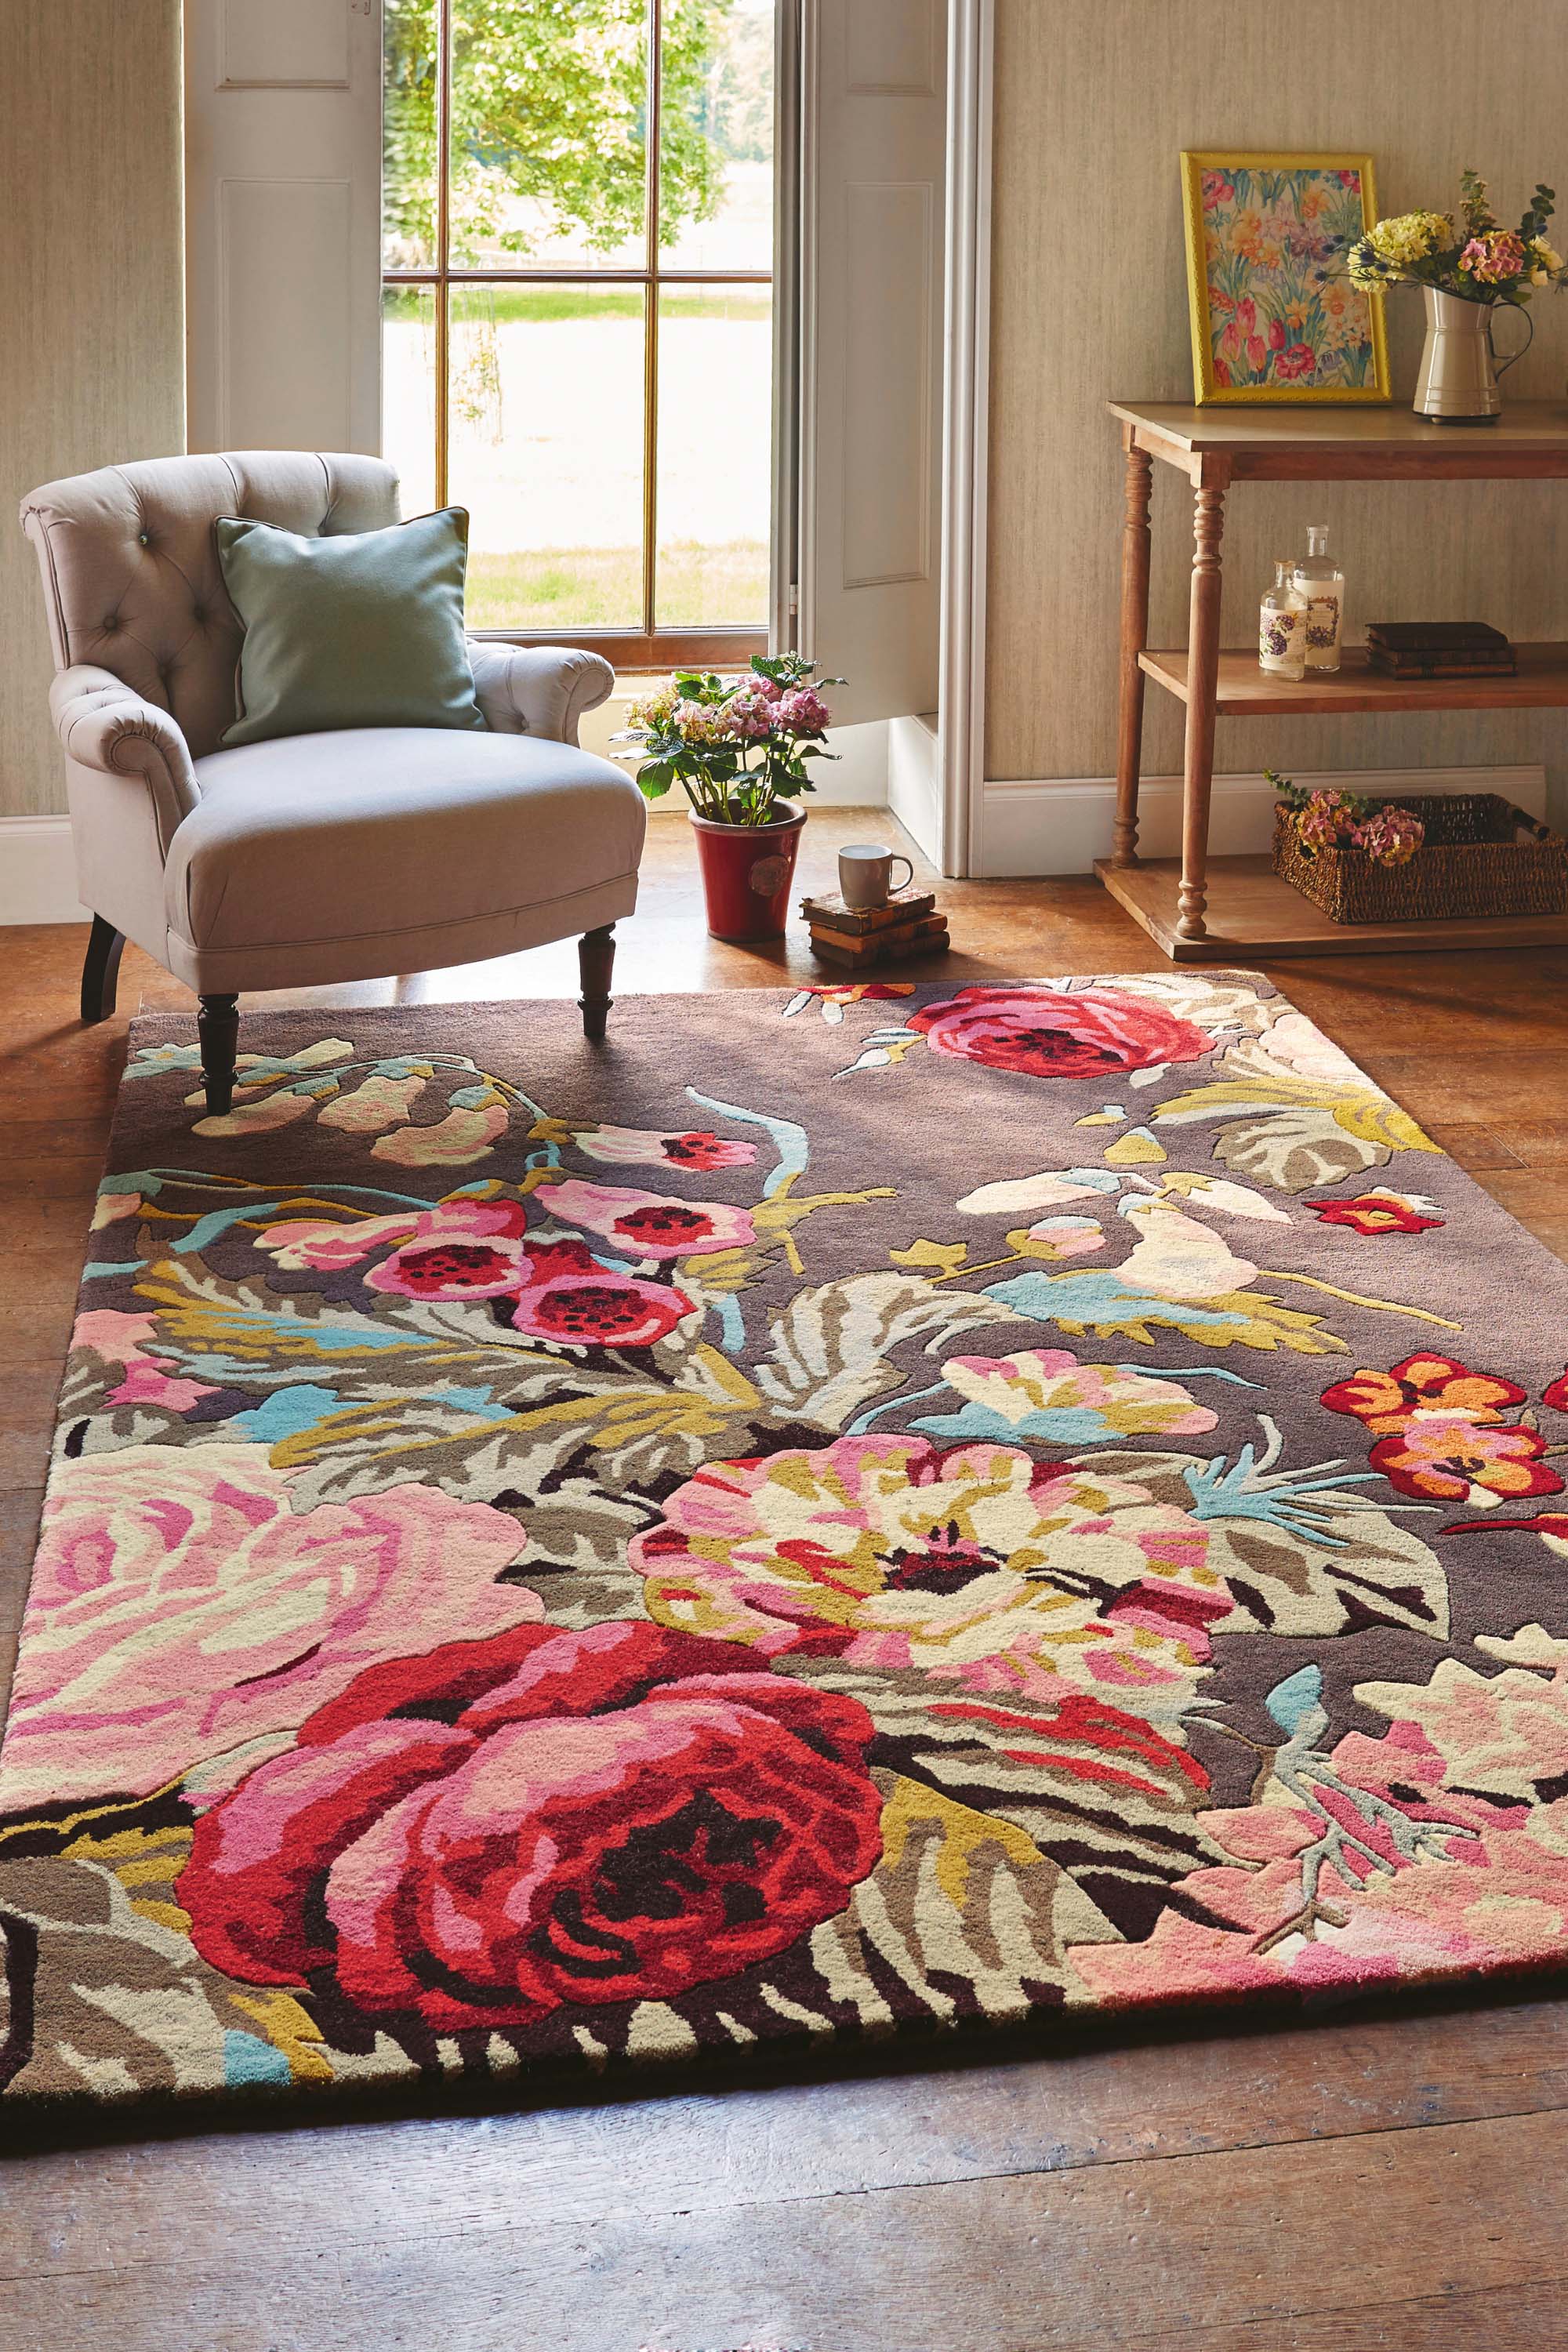 Rectangular grey rug with floral rose and leaf illustrations in grey, pink, green and blue